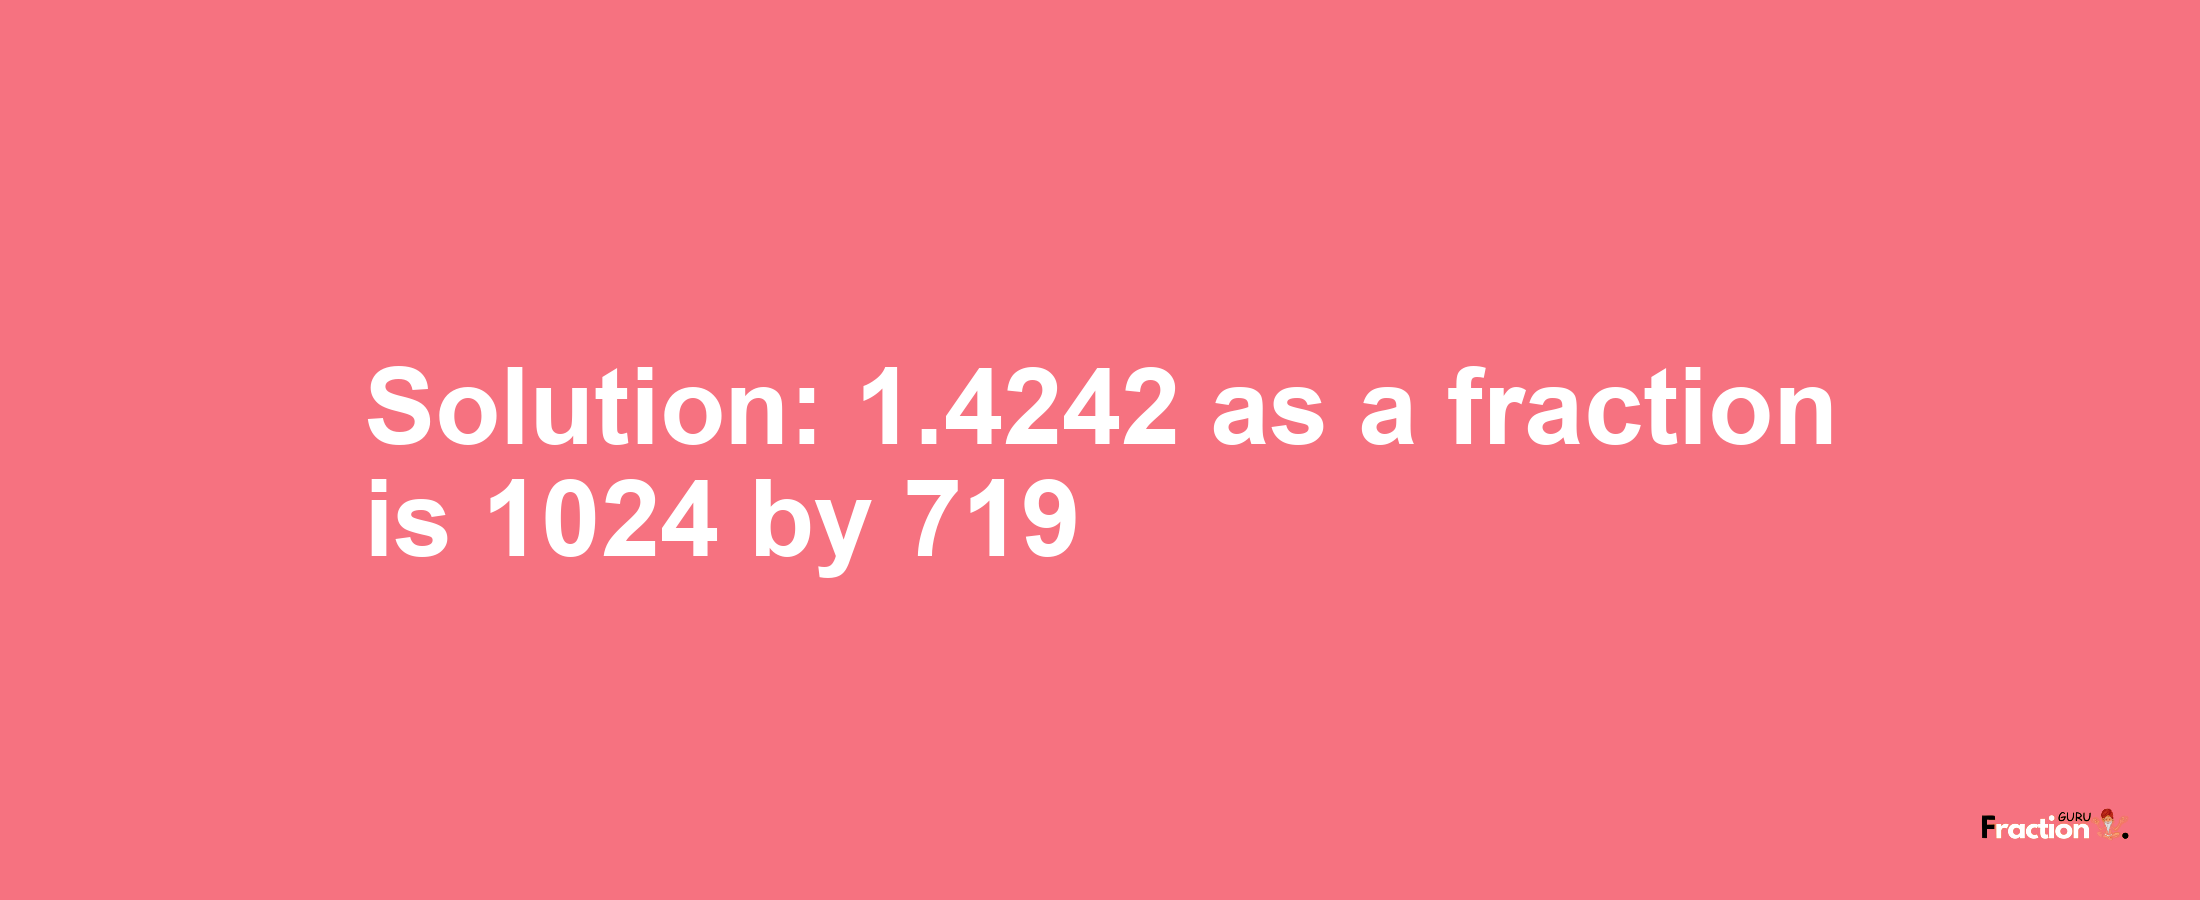 Solution:1.4242 as a fraction is 1024/719